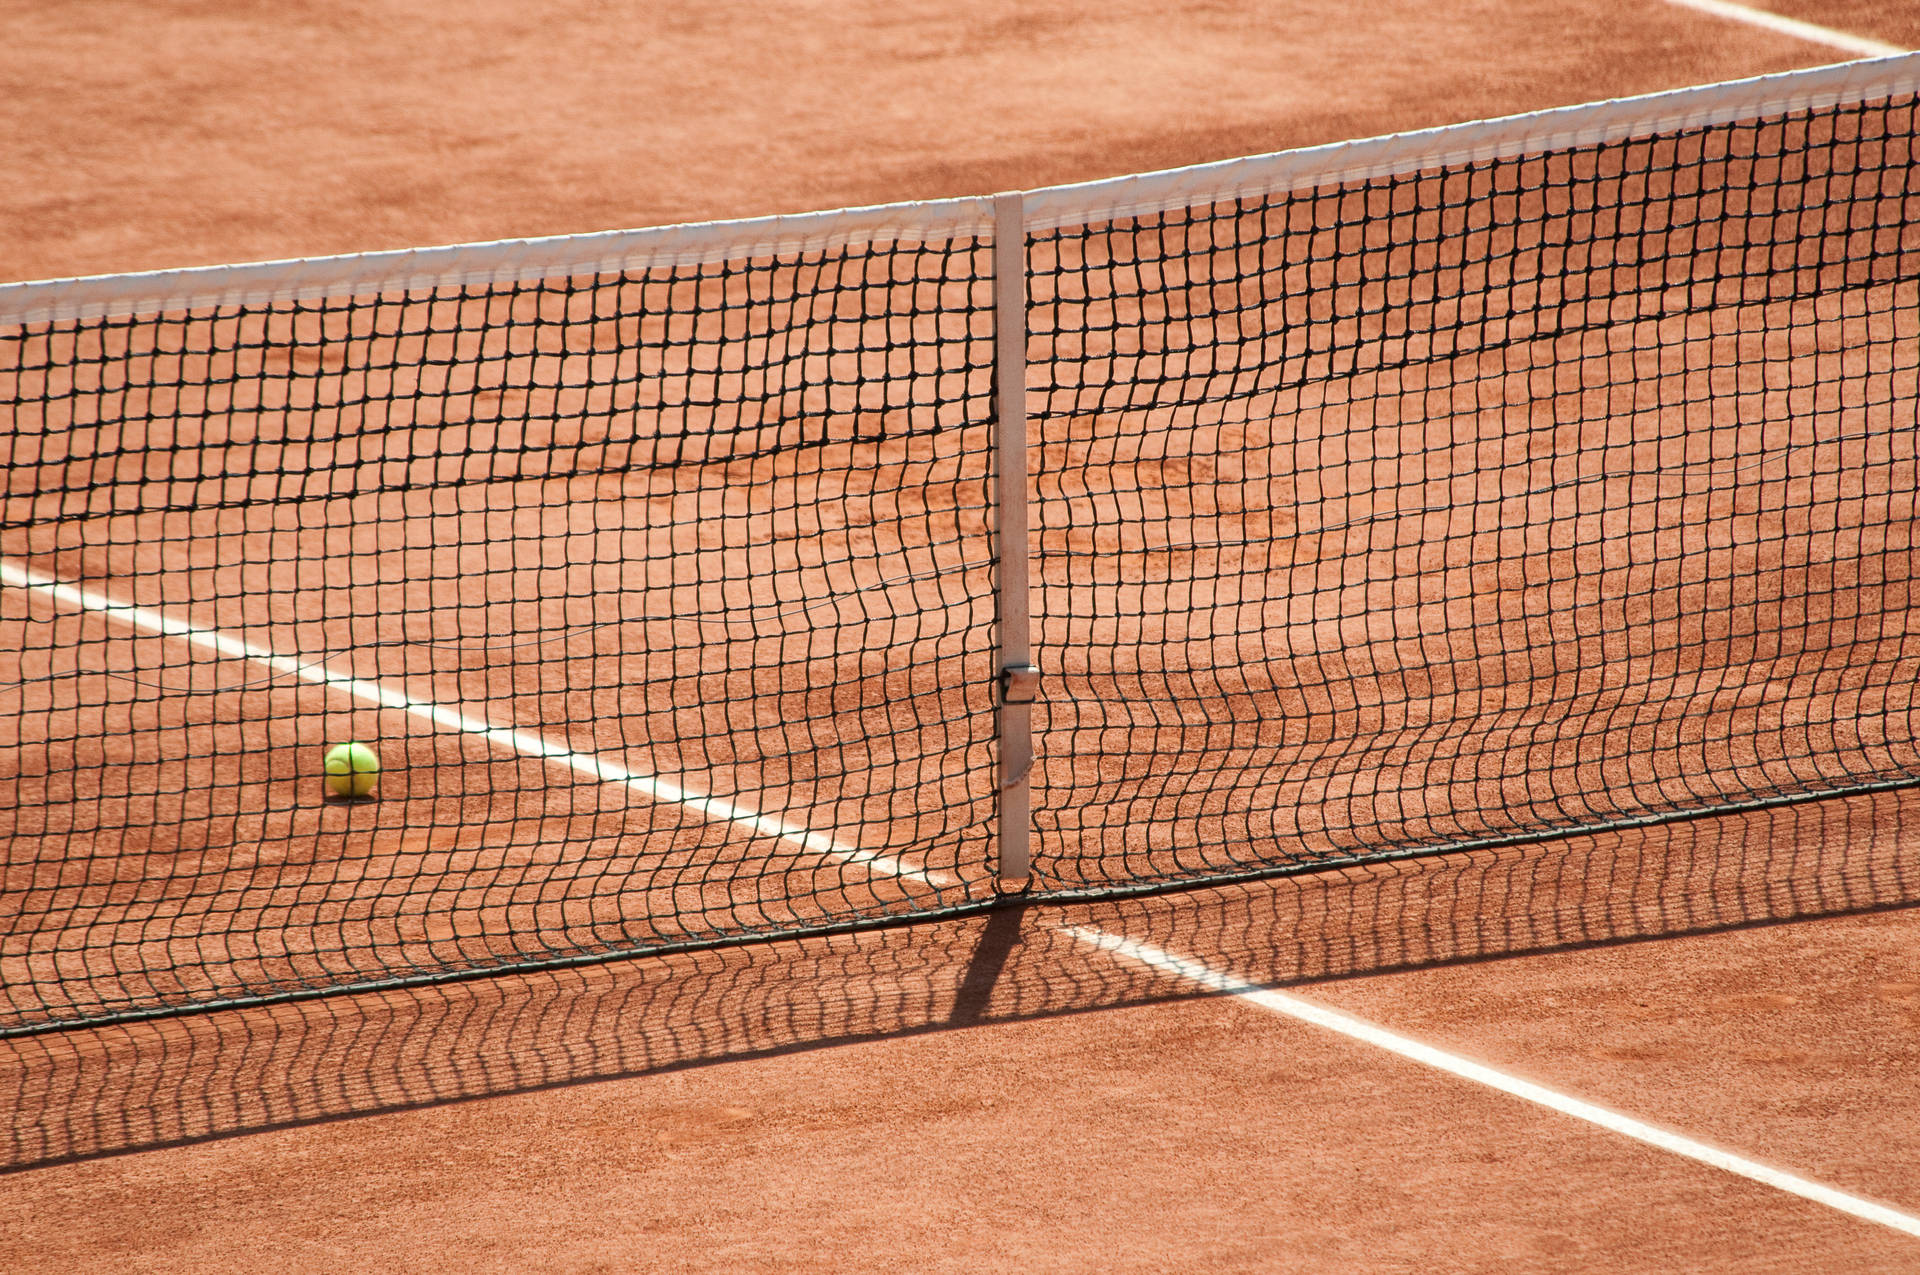 4288X2848 Tennis Wallpaper and Background